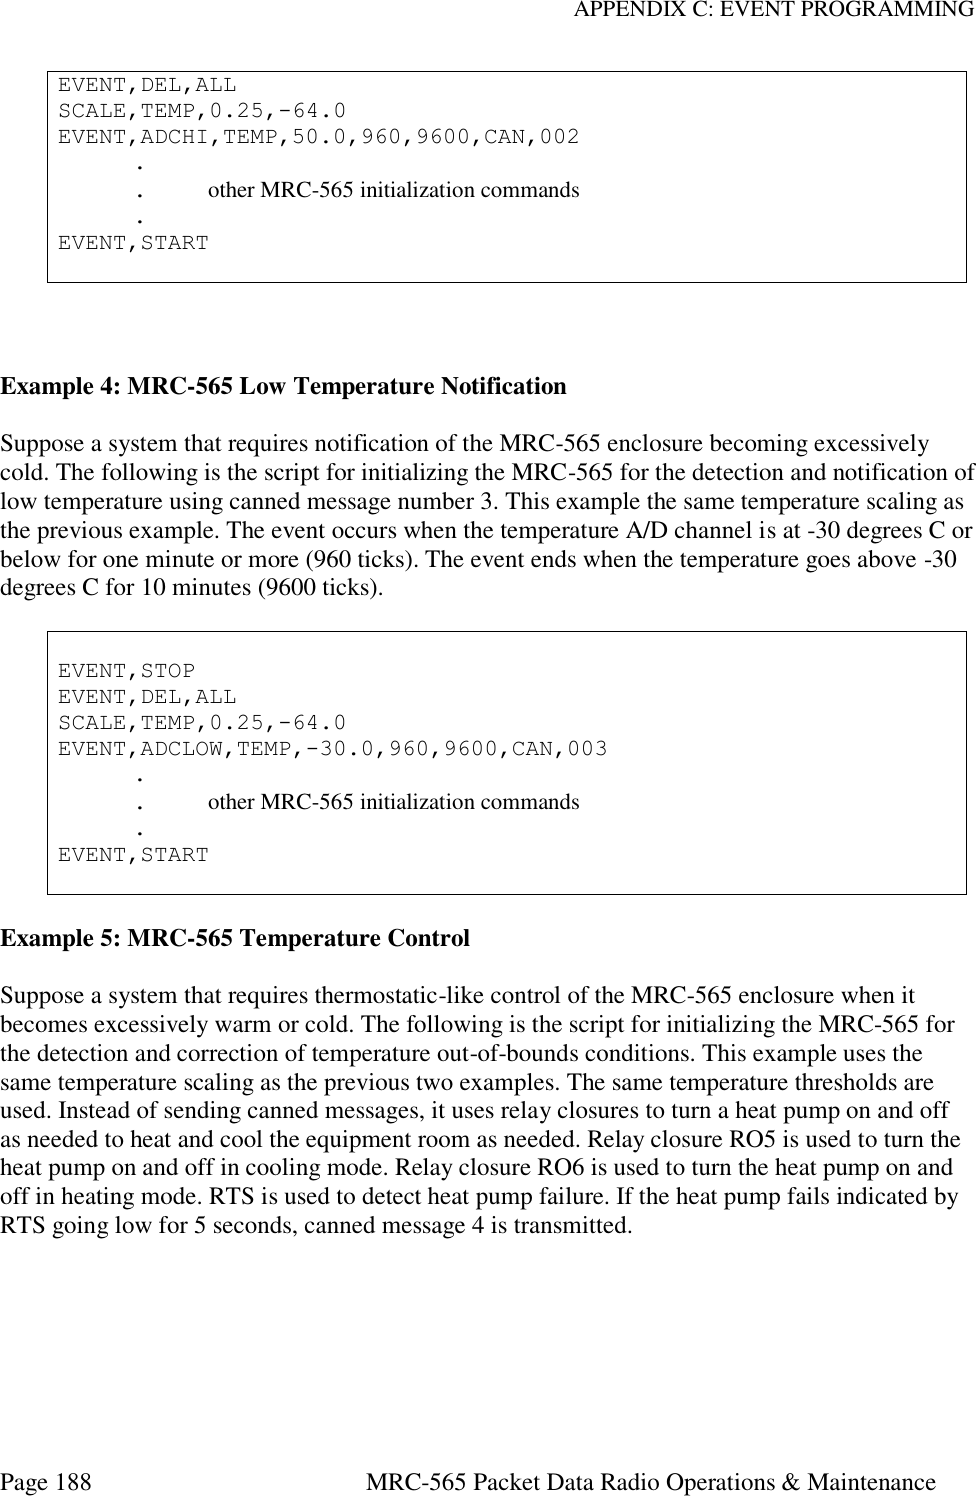 APPENDIX C: EVENT PROGRAMMING Page 188  MRC-565 Packet Data Radio Operations &amp; Maintenance EVENT,DEL,ALL SCALE,TEMP,0.25,-64.0 EVENT,ADCHI,TEMP,50.0,960,9600,CAN,002   .   .  other MRC-565 initialization commands   . EVENT,START    Example 4: MRC-565 Low Temperature Notification  Suppose a system that requires notification of the MRC-565 enclosure becoming excessively cold. The following is the script for initializing the MRC-565 for the detection and notification of low temperature using canned message number 3. This example the same temperature scaling as the previous example. The event occurs when the temperature A/D channel is at -30 degrees C or below for one minute or more (960 ticks). The event ends when the temperature goes above -30 degrees C for 10 minutes (9600 ticks).   EVENT,STOP EVENT,DEL,ALL SCALE,TEMP,0.25,-64.0 EVENT,ADCLOW,TEMP,-30.0,960,9600,CAN,003   .   .  other MRC-565 initialization commands   . EVENT,START   Example 5: MRC-565 Temperature Control  Suppose a system that requires thermostatic-like control of the MRC-565 enclosure when it becomes excessively warm or cold. The following is the script for initializing the MRC-565 for the detection and correction of temperature out-of-bounds conditions. This example uses the same temperature scaling as the previous two examples. The same temperature thresholds are used. Instead of sending canned messages, it uses relay closures to turn a heat pump on and off as needed to heat and cool the equipment room as needed. Relay closure RO5 is used to turn the heat pump on and off in cooling mode. Relay closure RO6 is used to turn the heat pump on and off in heating mode. RTS is used to detect heat pump failure. If the heat pump fails indicated by RTS going low for 5 seconds, canned message 4 is transmitted.  